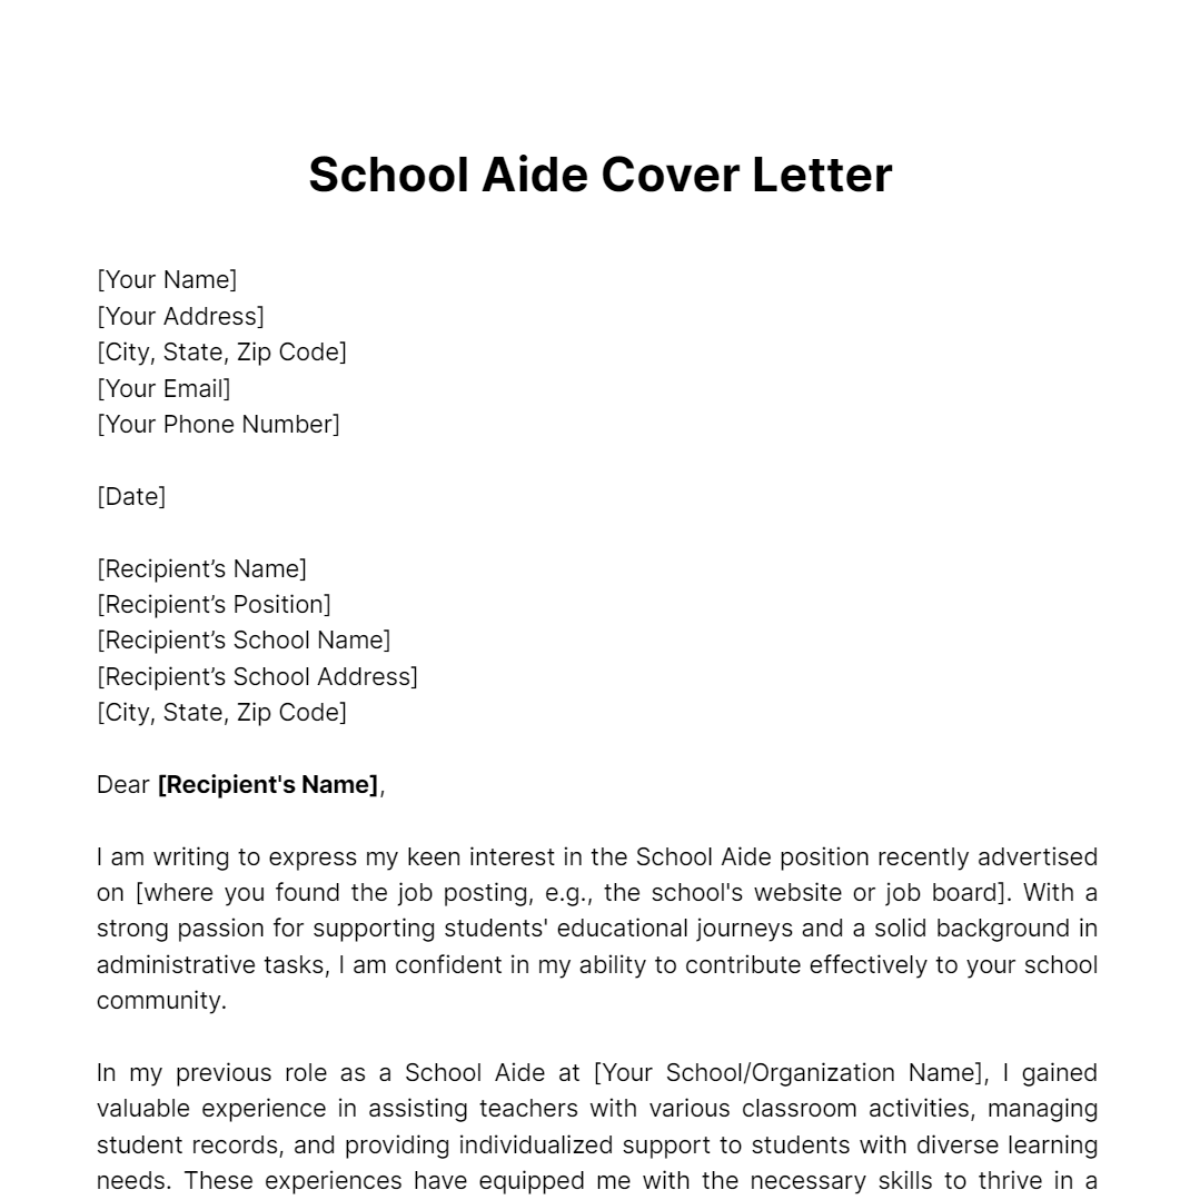 School Aide Cover Letter Template